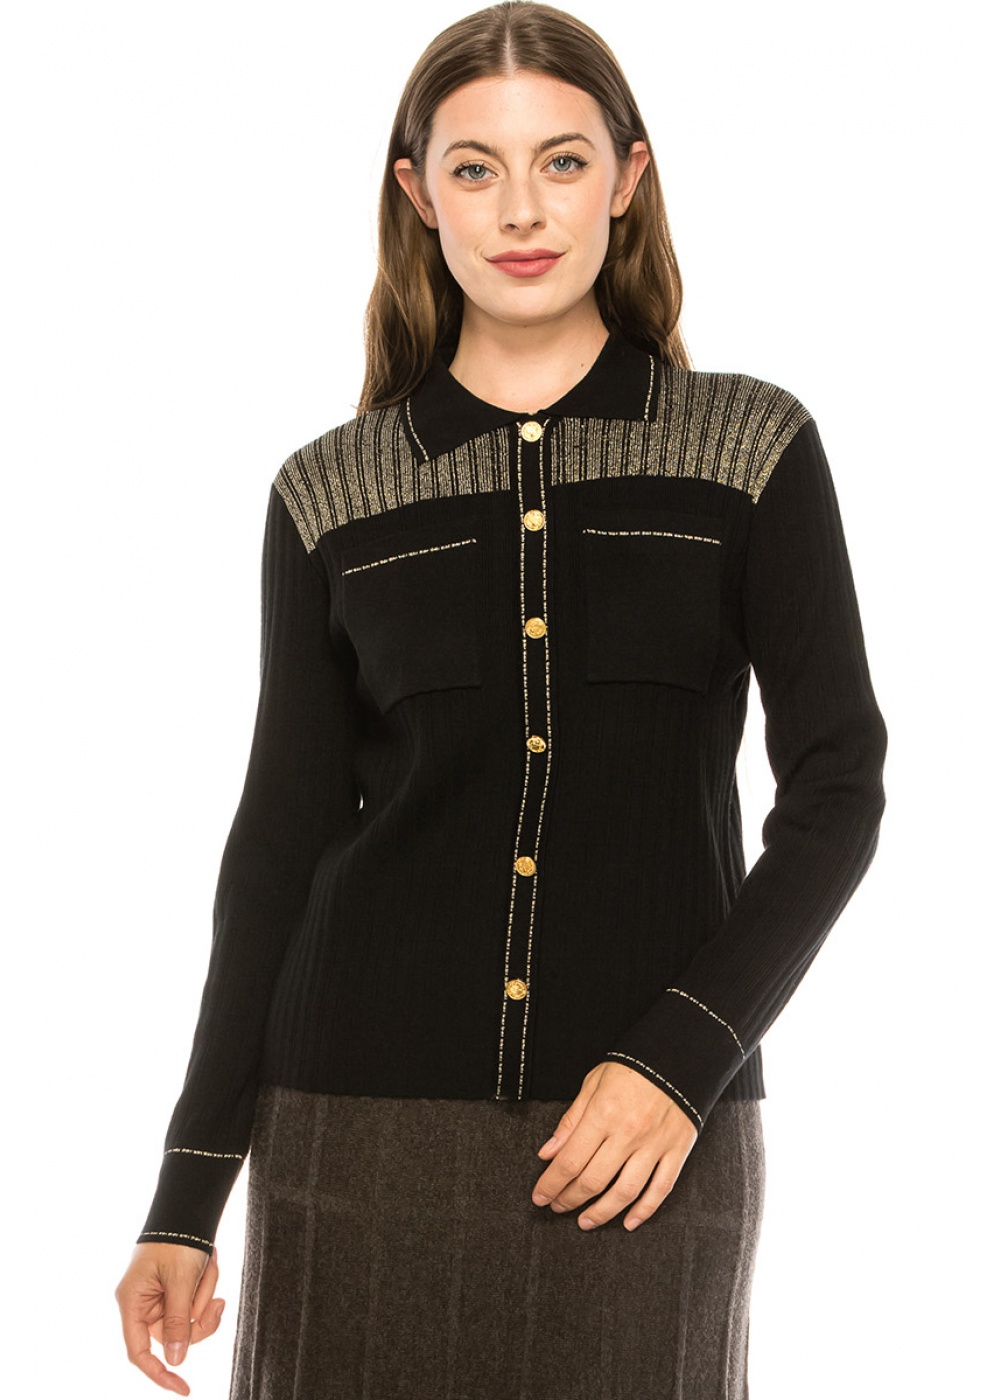 Black and Gold Collared Shirt